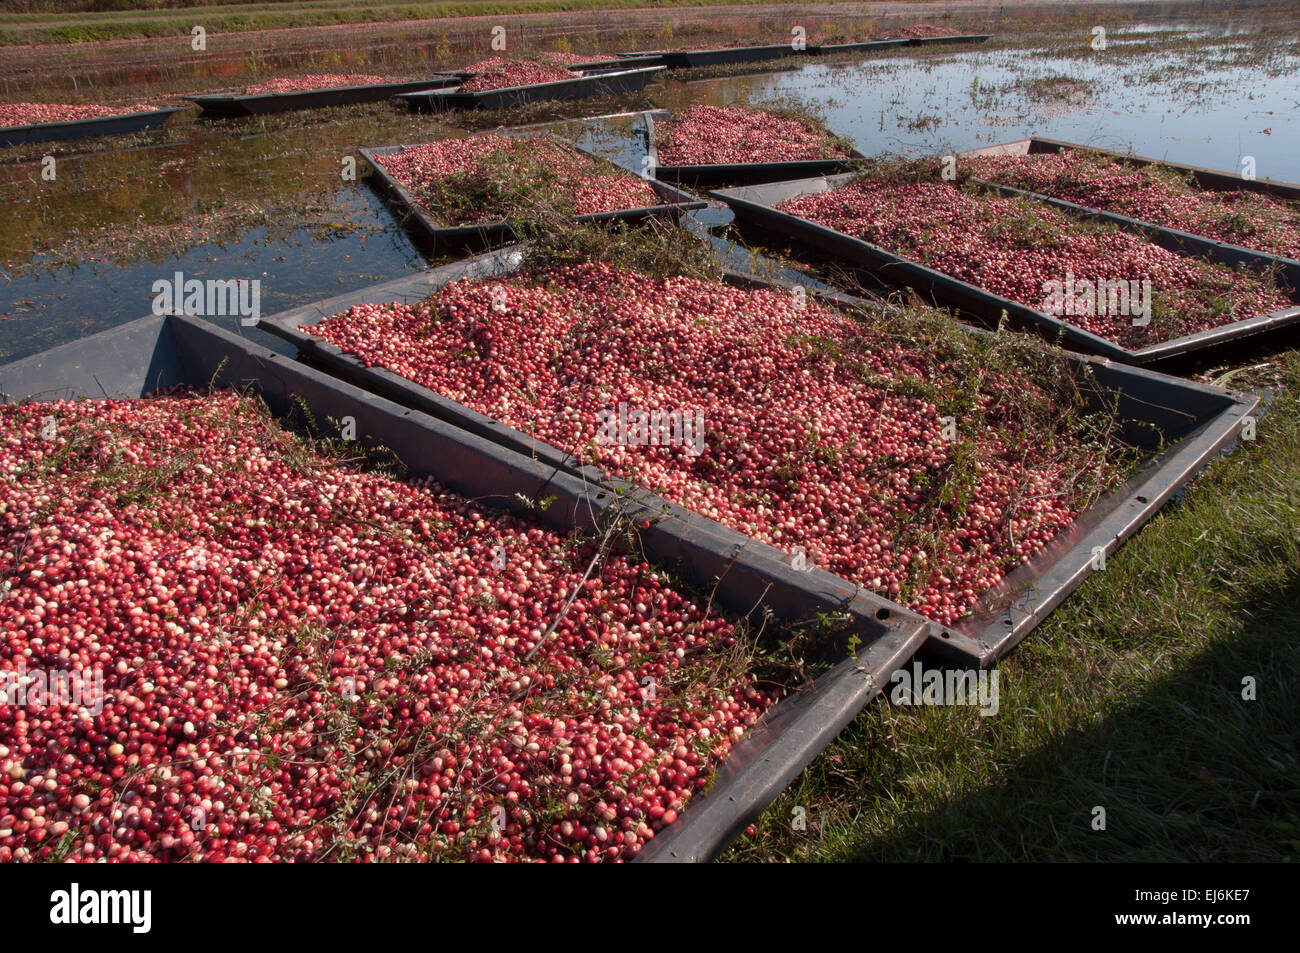 Several tubs full of harvested raw cranberries in a cranberry farm. Stock Photo